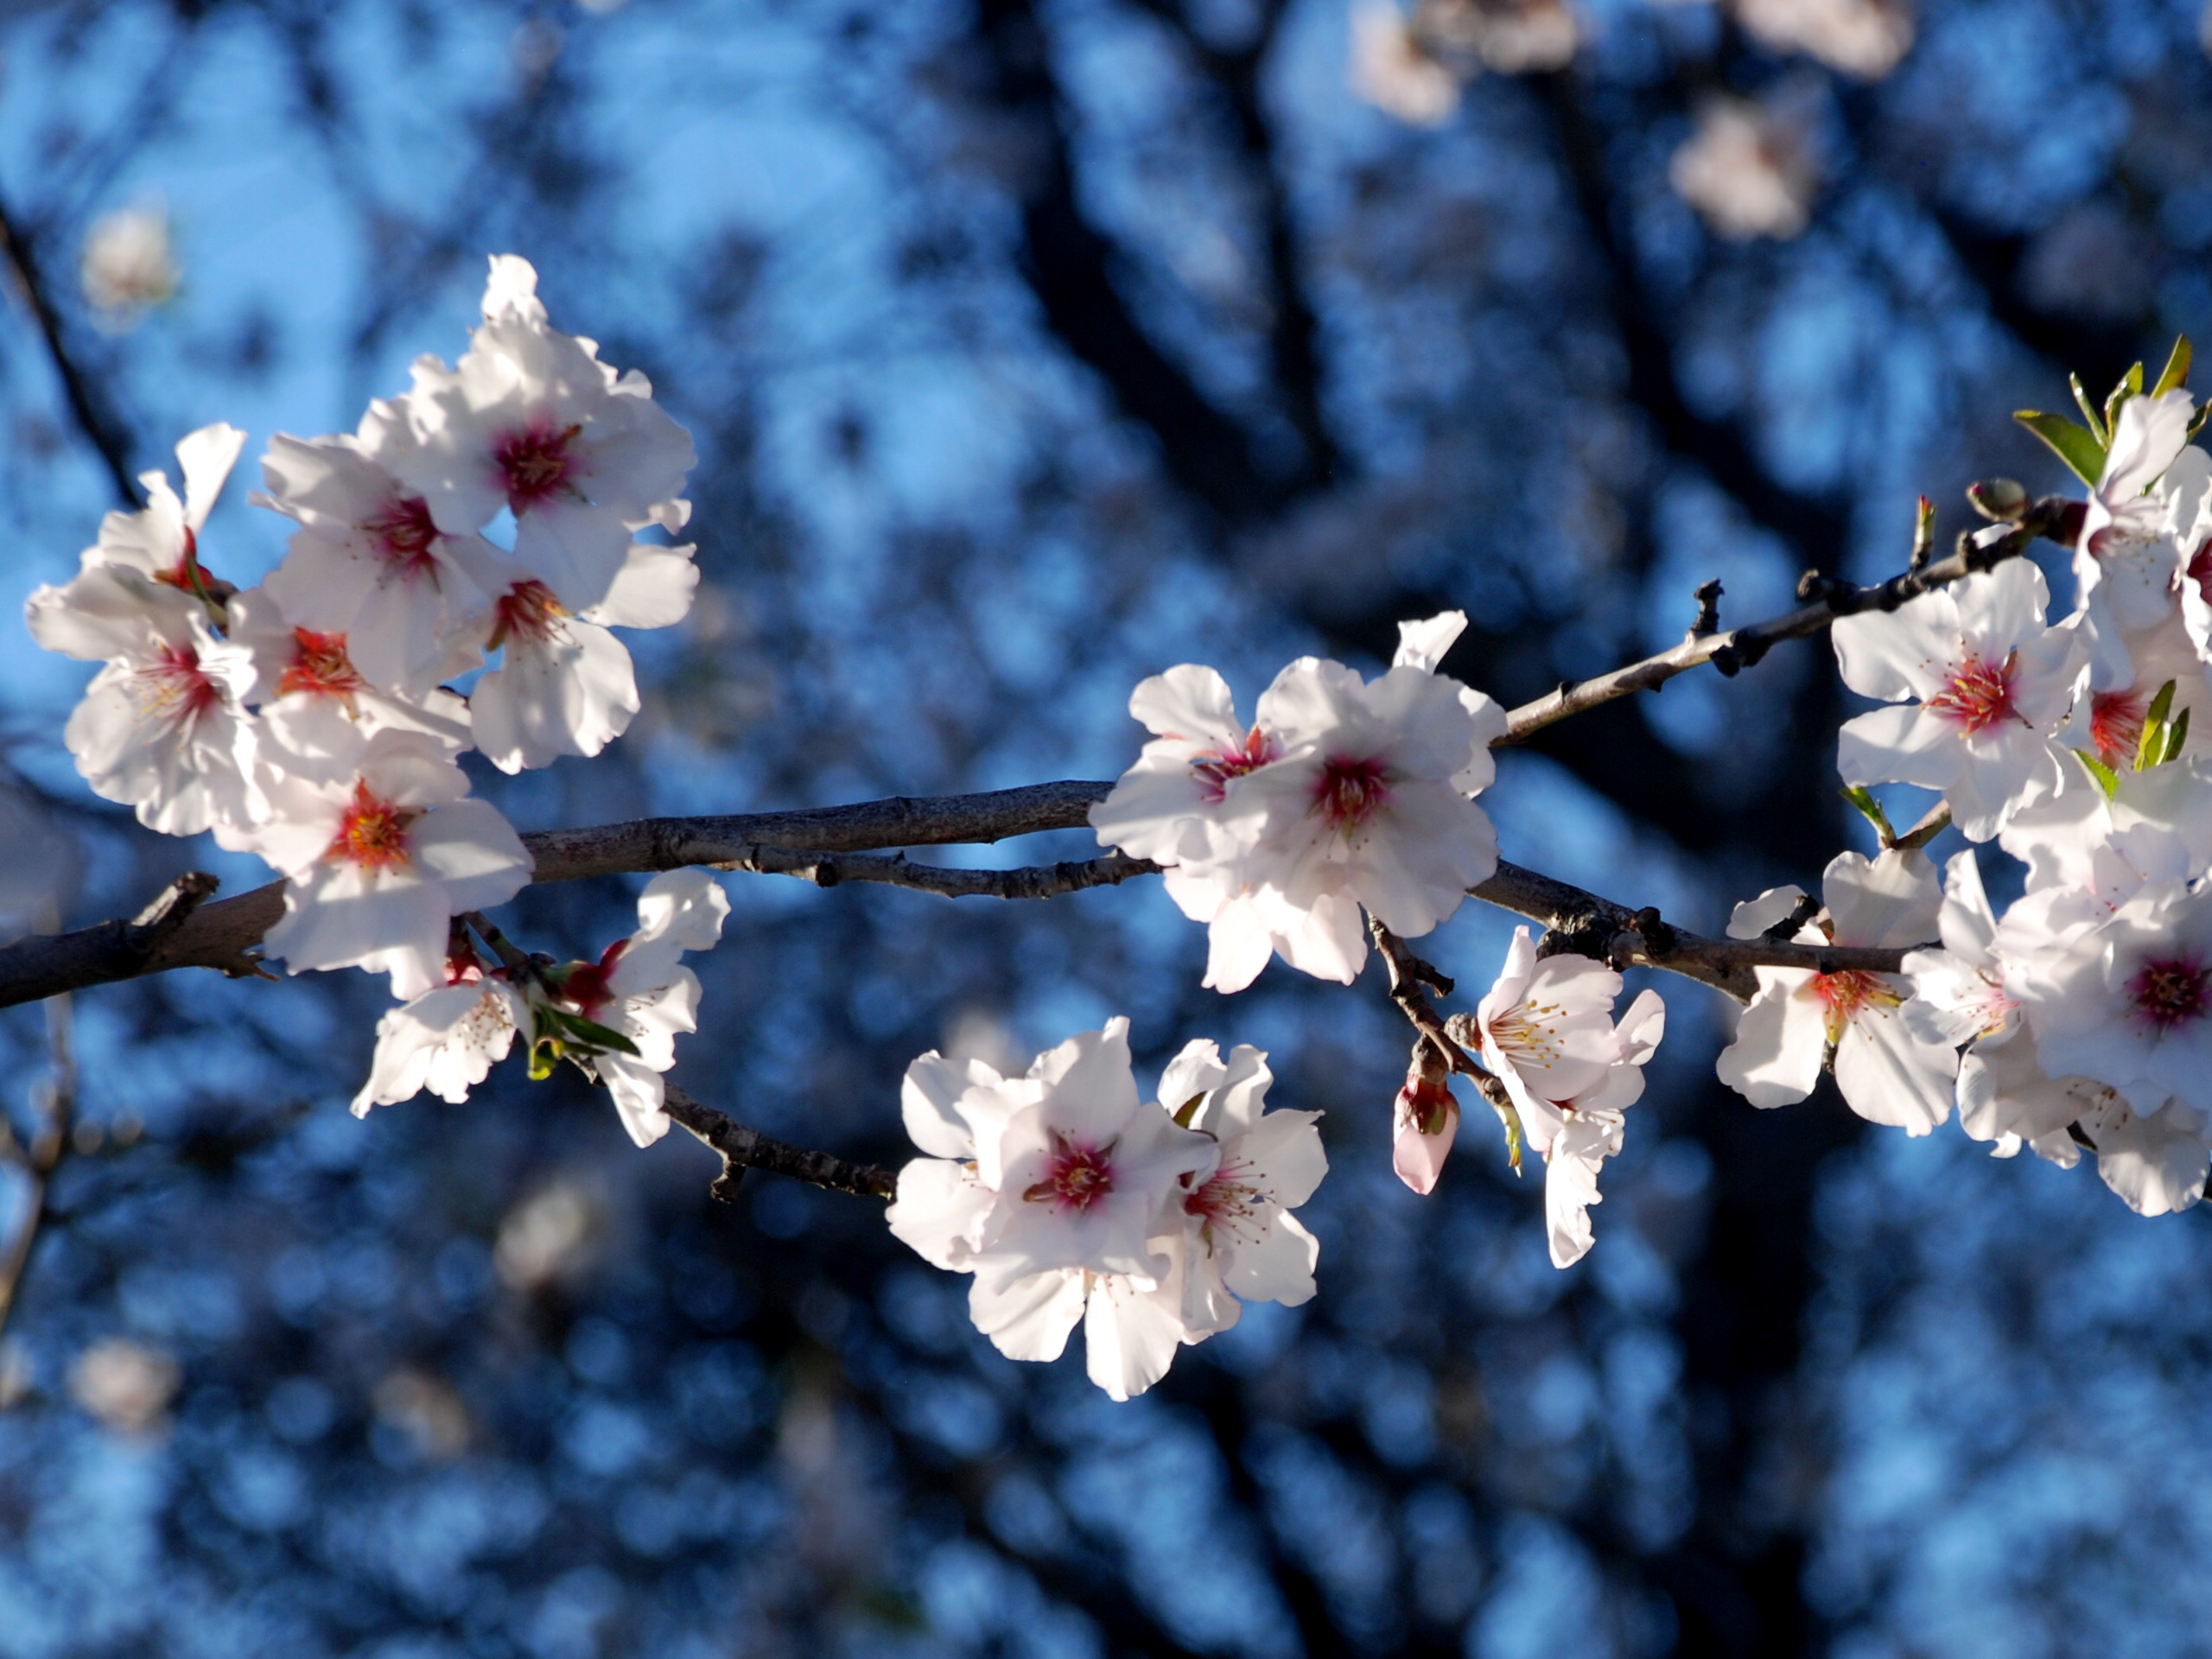 Hope and the Almond Blossom – Ever-Increasing Light